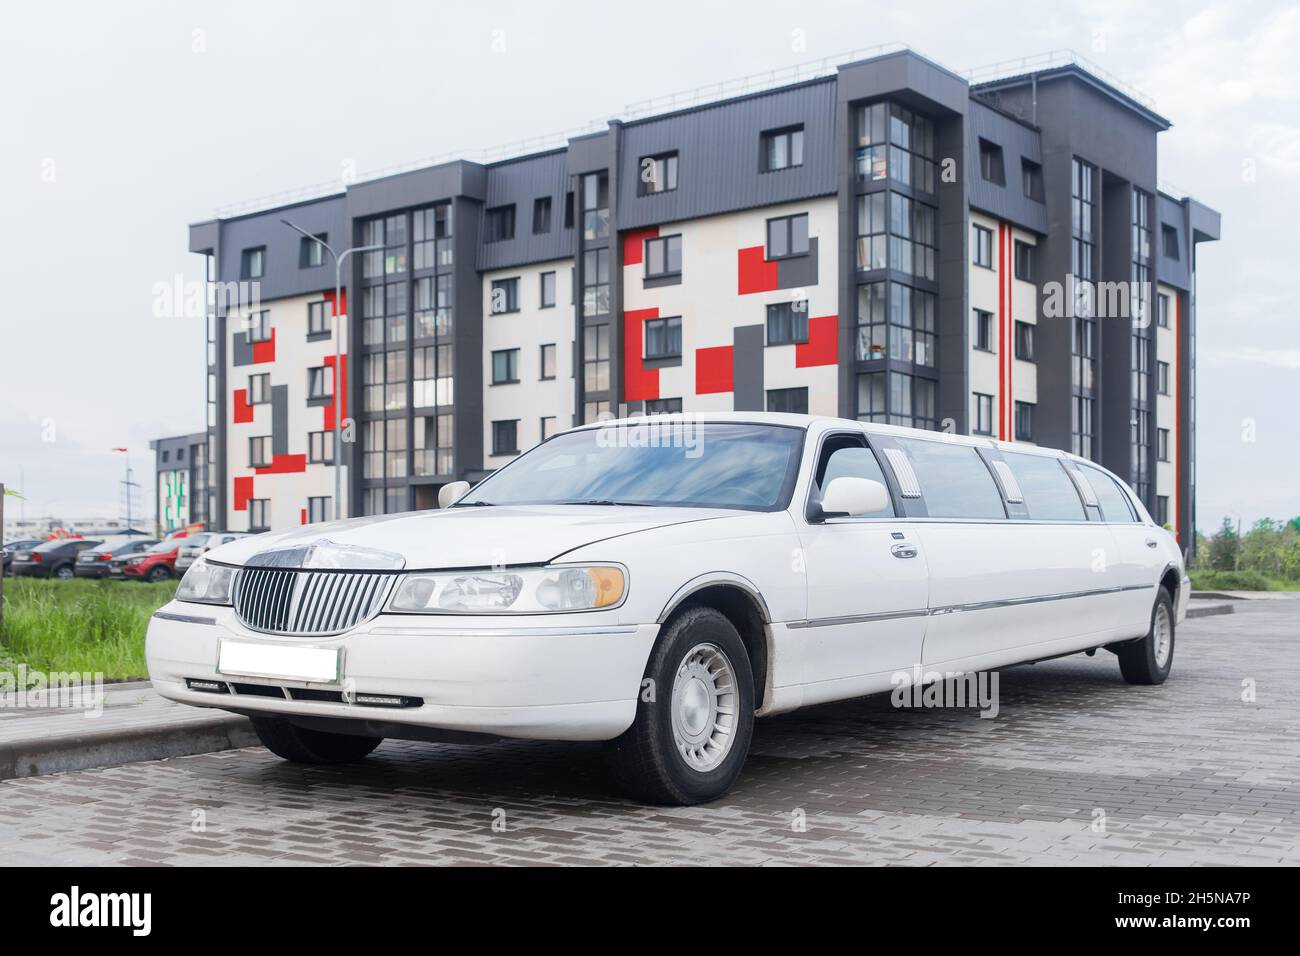 White limousine luxury long car for celebrations and celebrations against the backdrop of a modern city building. Stock Photo